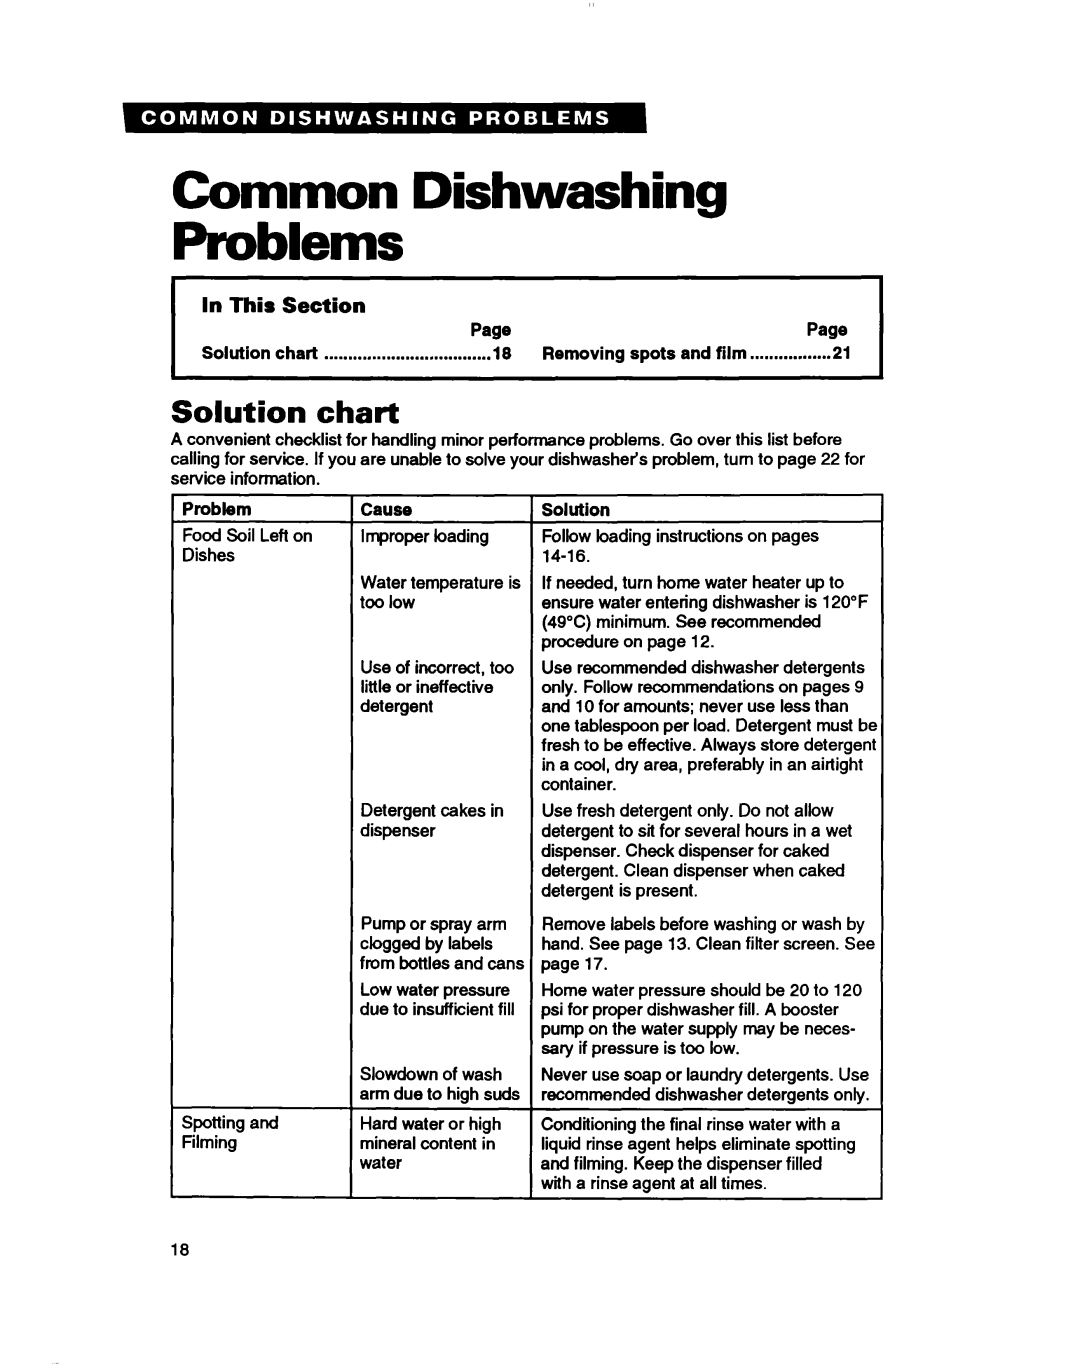 Whirlpool DU8100, DU4000, DU8400, DU8000 warranty Common Dishwashing Problems, Solution chart, In This Section, Cause 